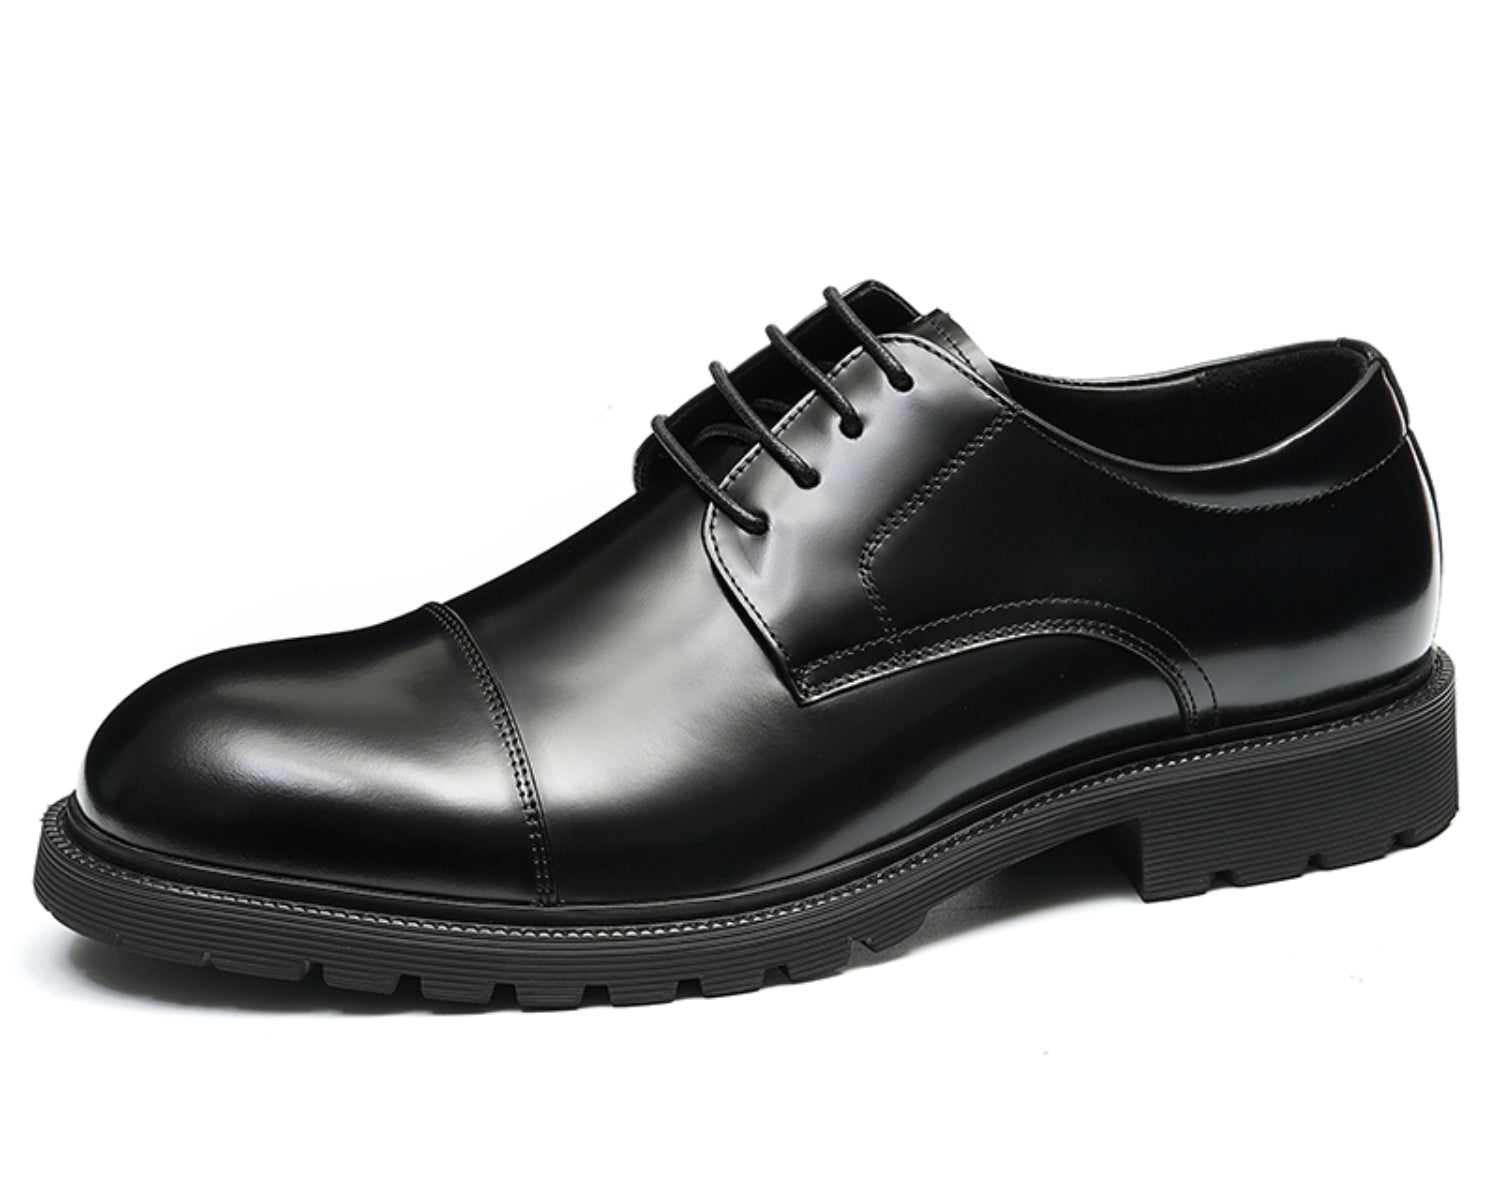 Men's Cap Toe Derby Shoes with Rubber Sole in various styles including manner, old, and skin boots11